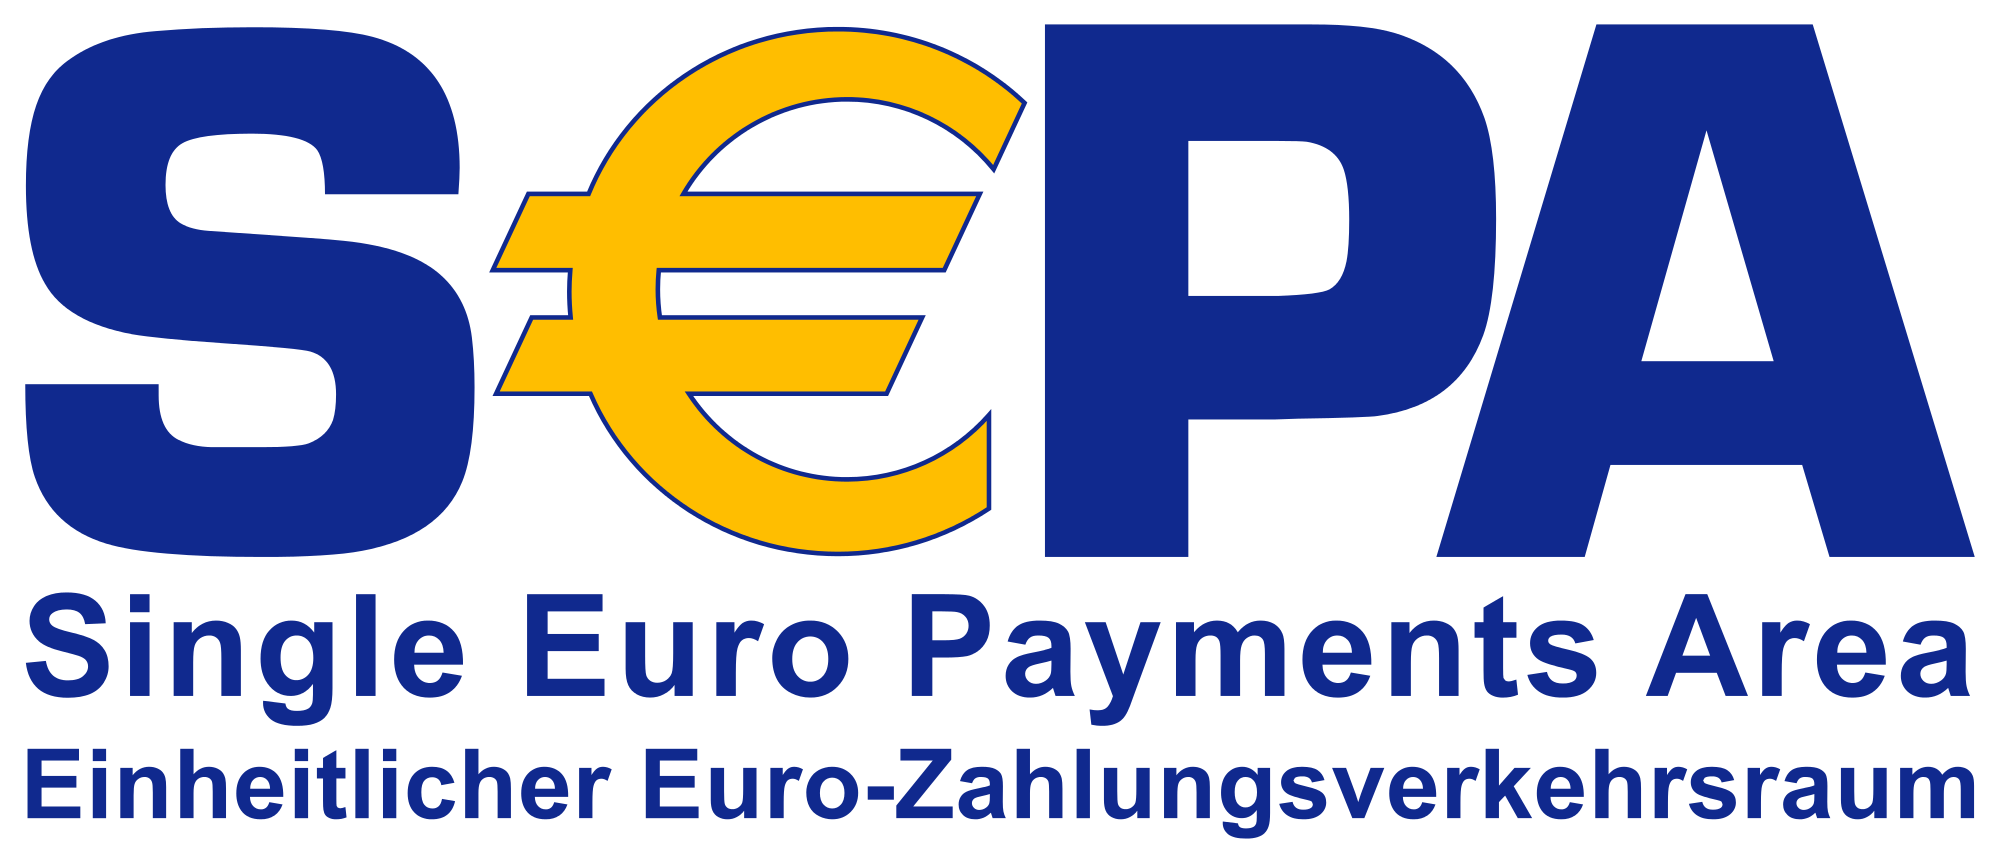 Single_Euro_Payments_Area_logo.svg.png